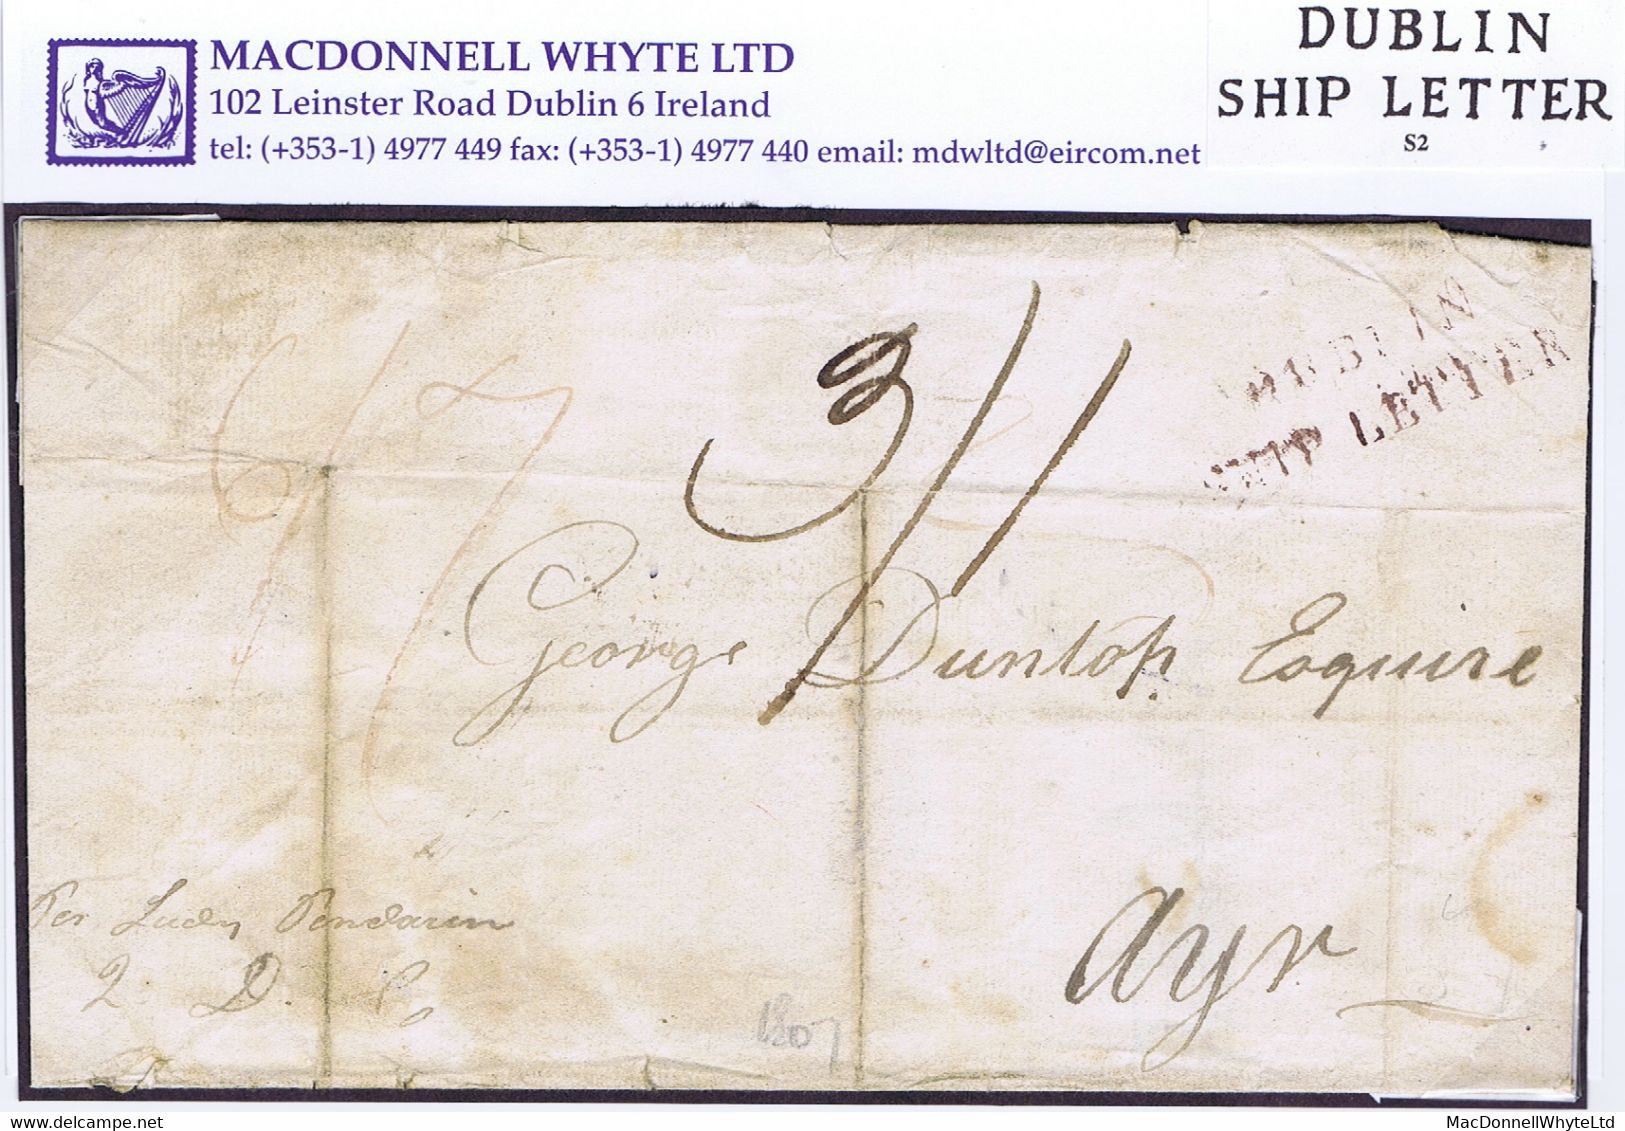 Ireland Maritime Dublin 1807 Cover To Ayr By Private Ship "Lady Pendarin" With 2-line DUBLIN/SHIP LETTER In Claret - Prephilately